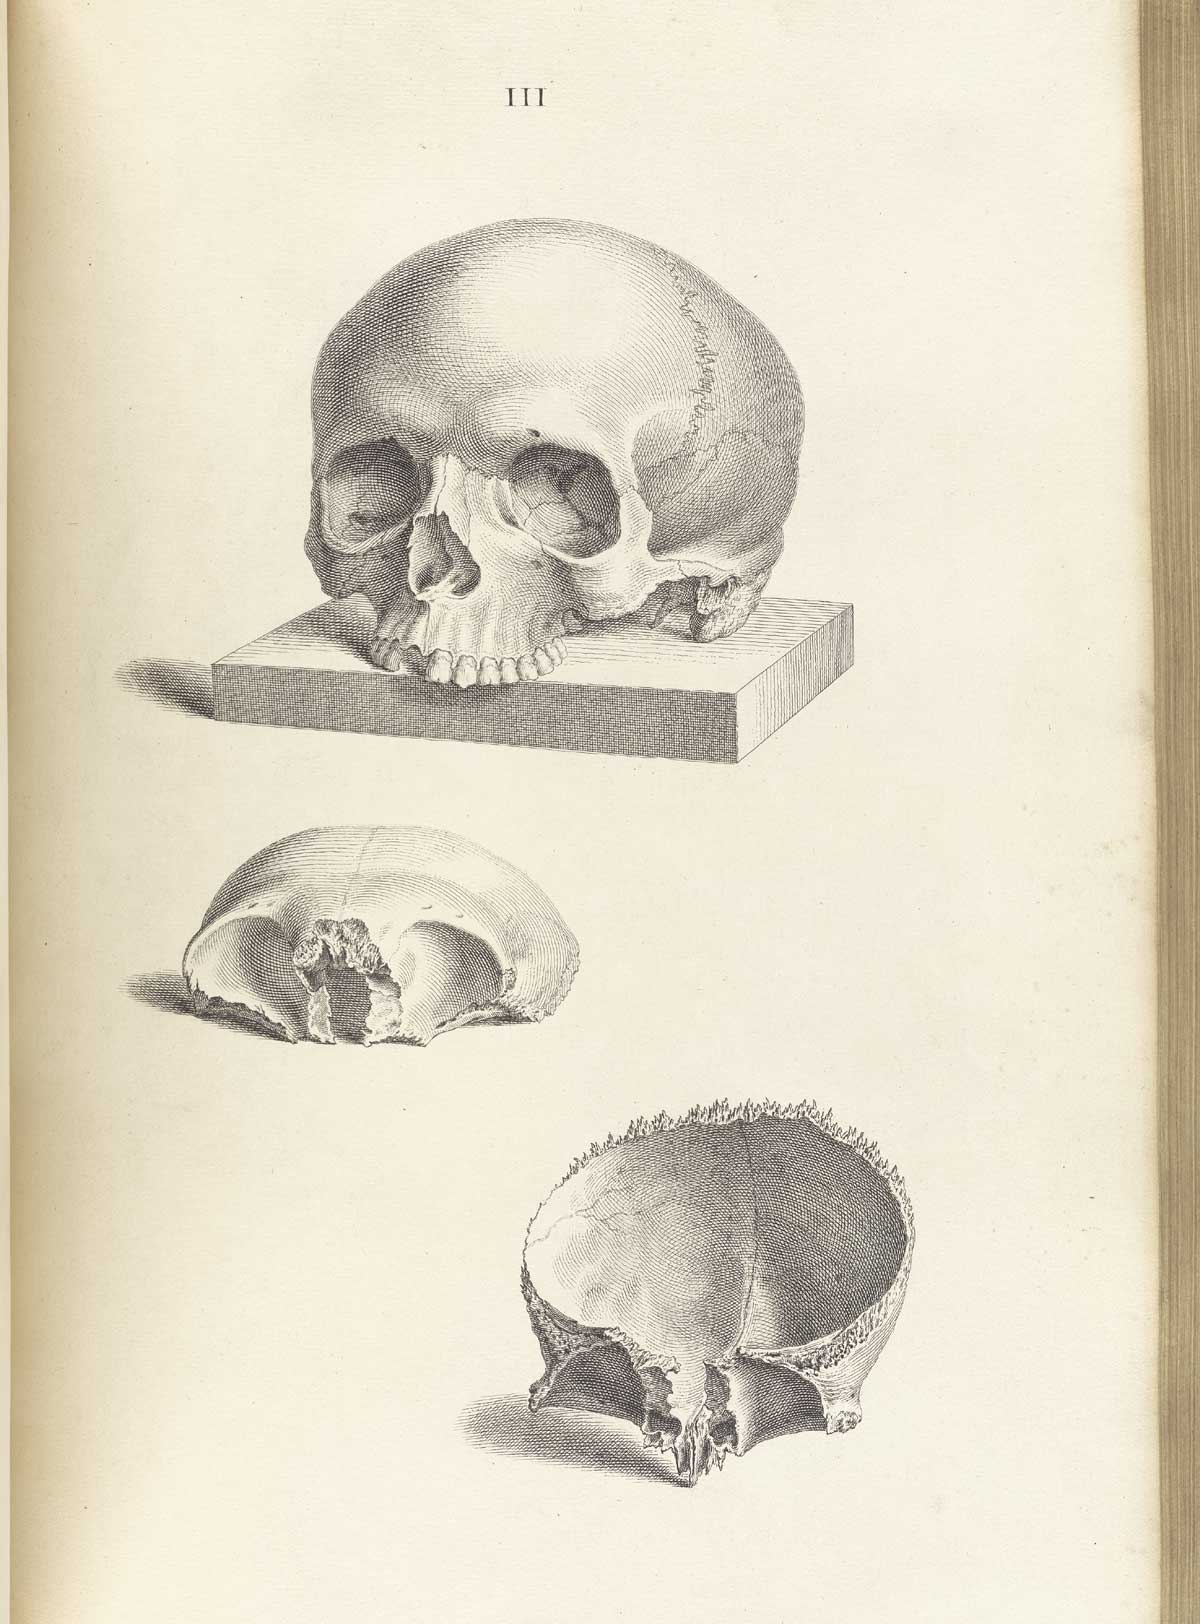 Engraving of a human skull without mandible on a wooden plank at top of the image and two frontal bones below, the first face up showing the exterior and the other face down, giving a view of the interior, from William Cheselden’s Osteographia, NLM Call no.: WZ 260 C499o 1733.